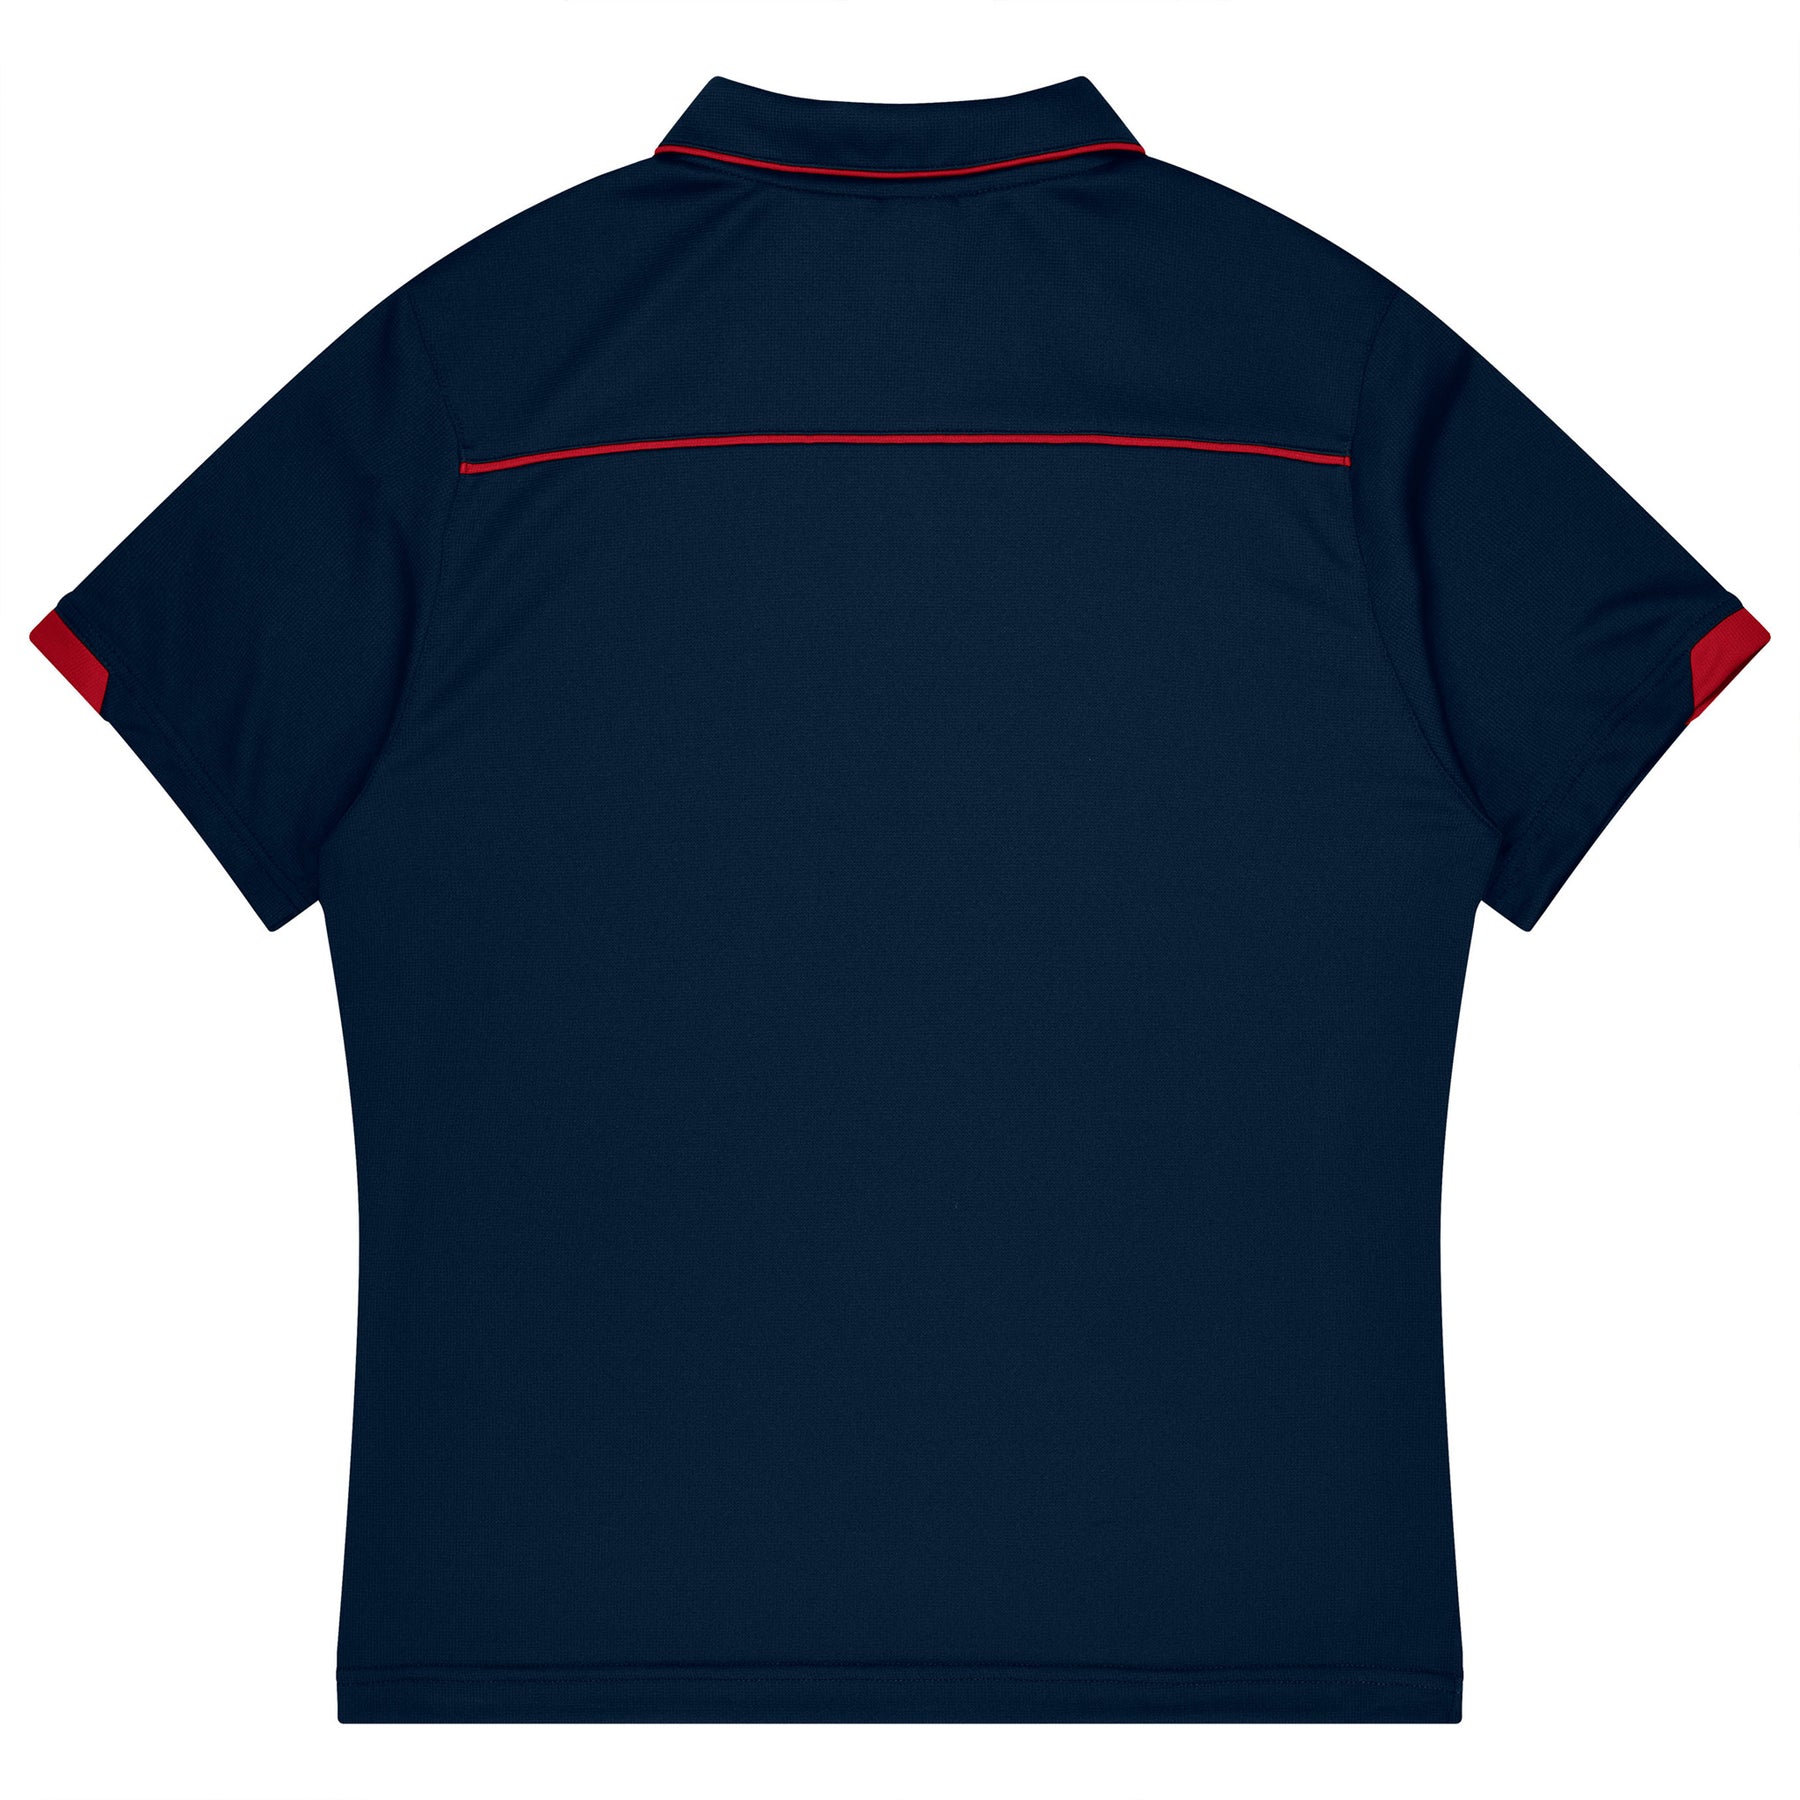 aussie pacific currumbin mens polos in navy red